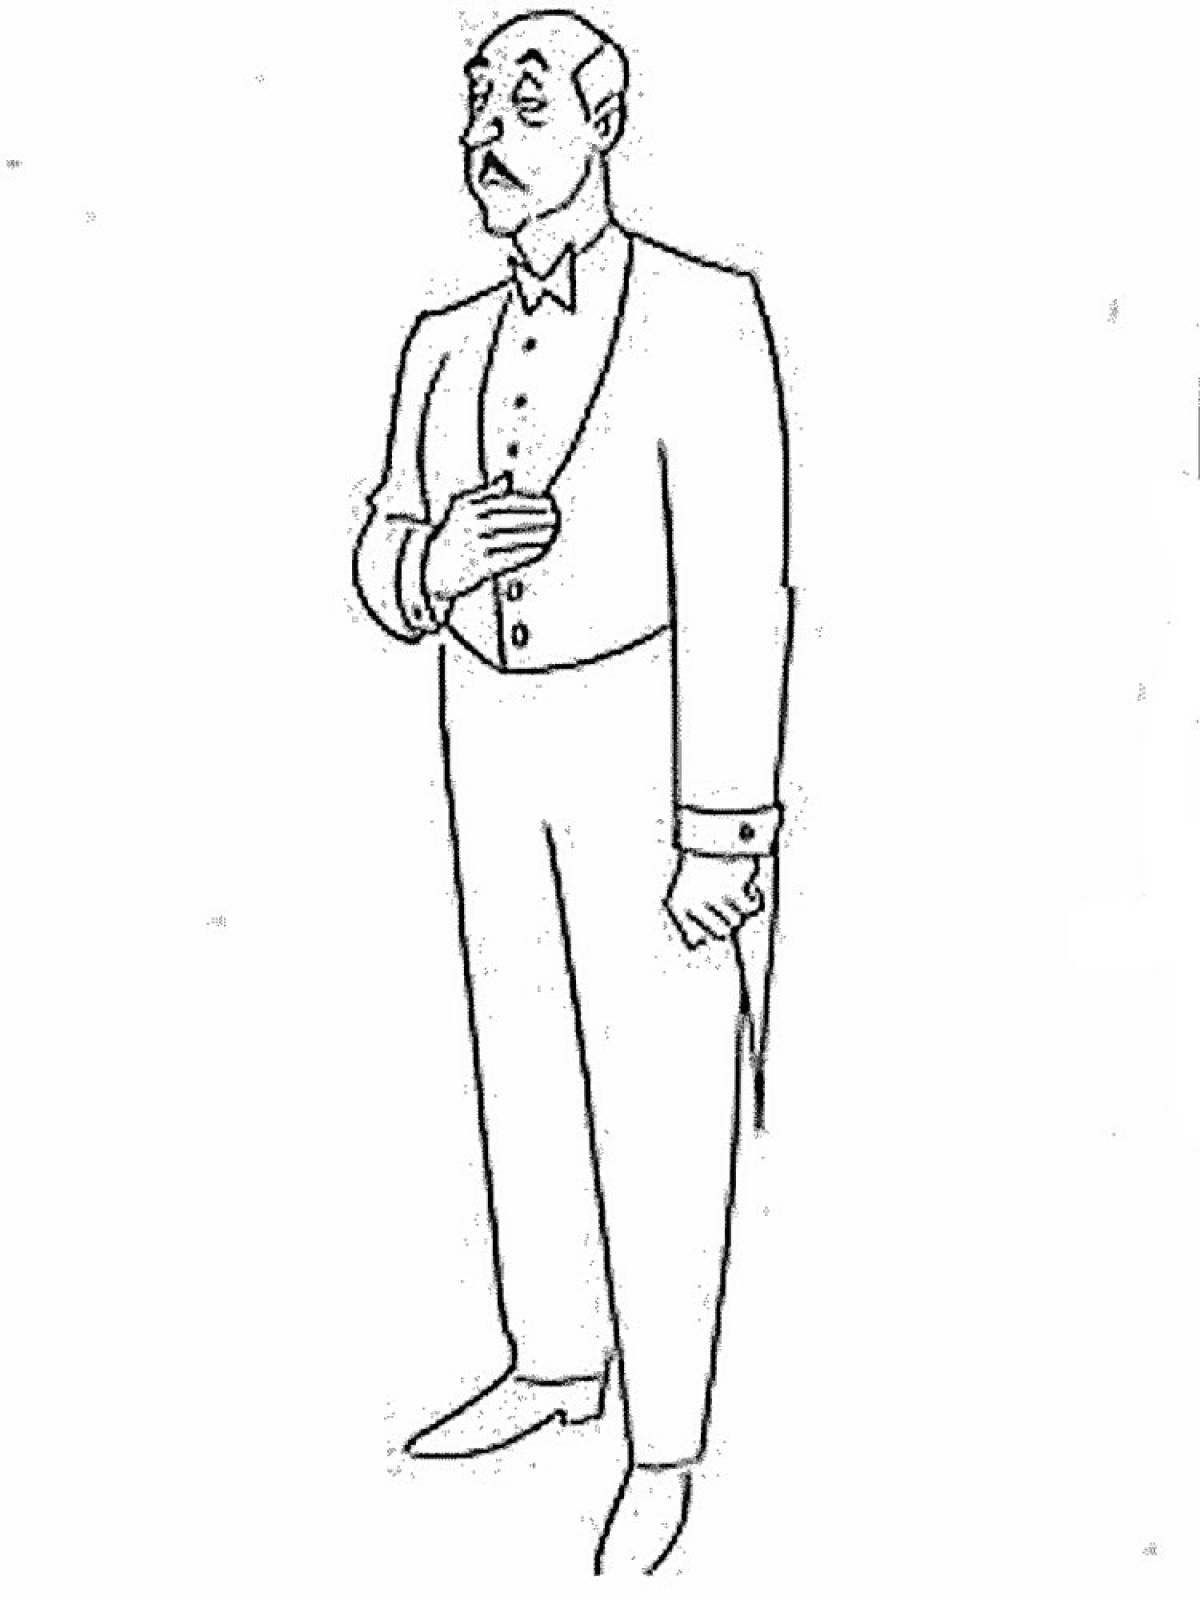 Man in a tailcoat